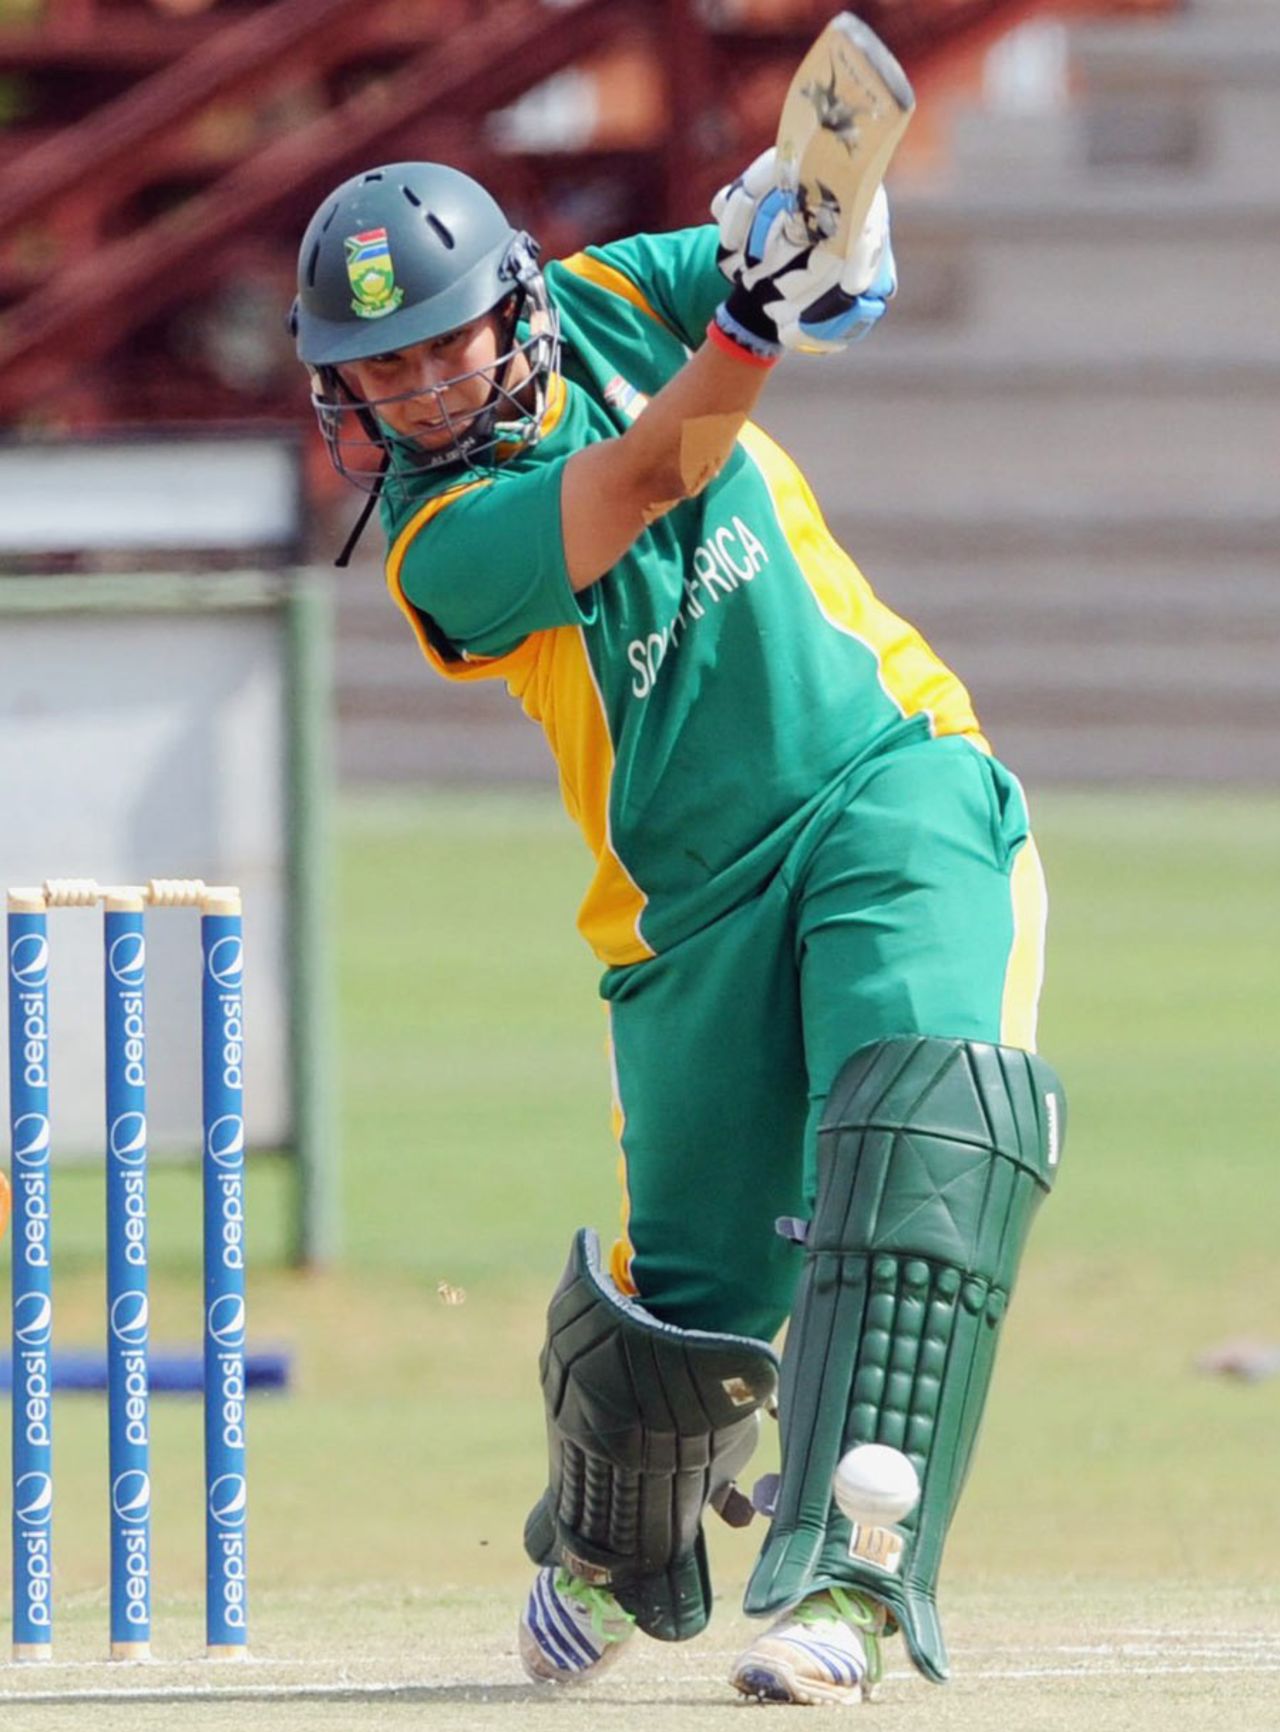 Shandre Fritz powers the ball down the ground, South Africa Women v Netherlands Women, ICC Women's Cricket Challenge, Potchefstroom, October 12, 2010